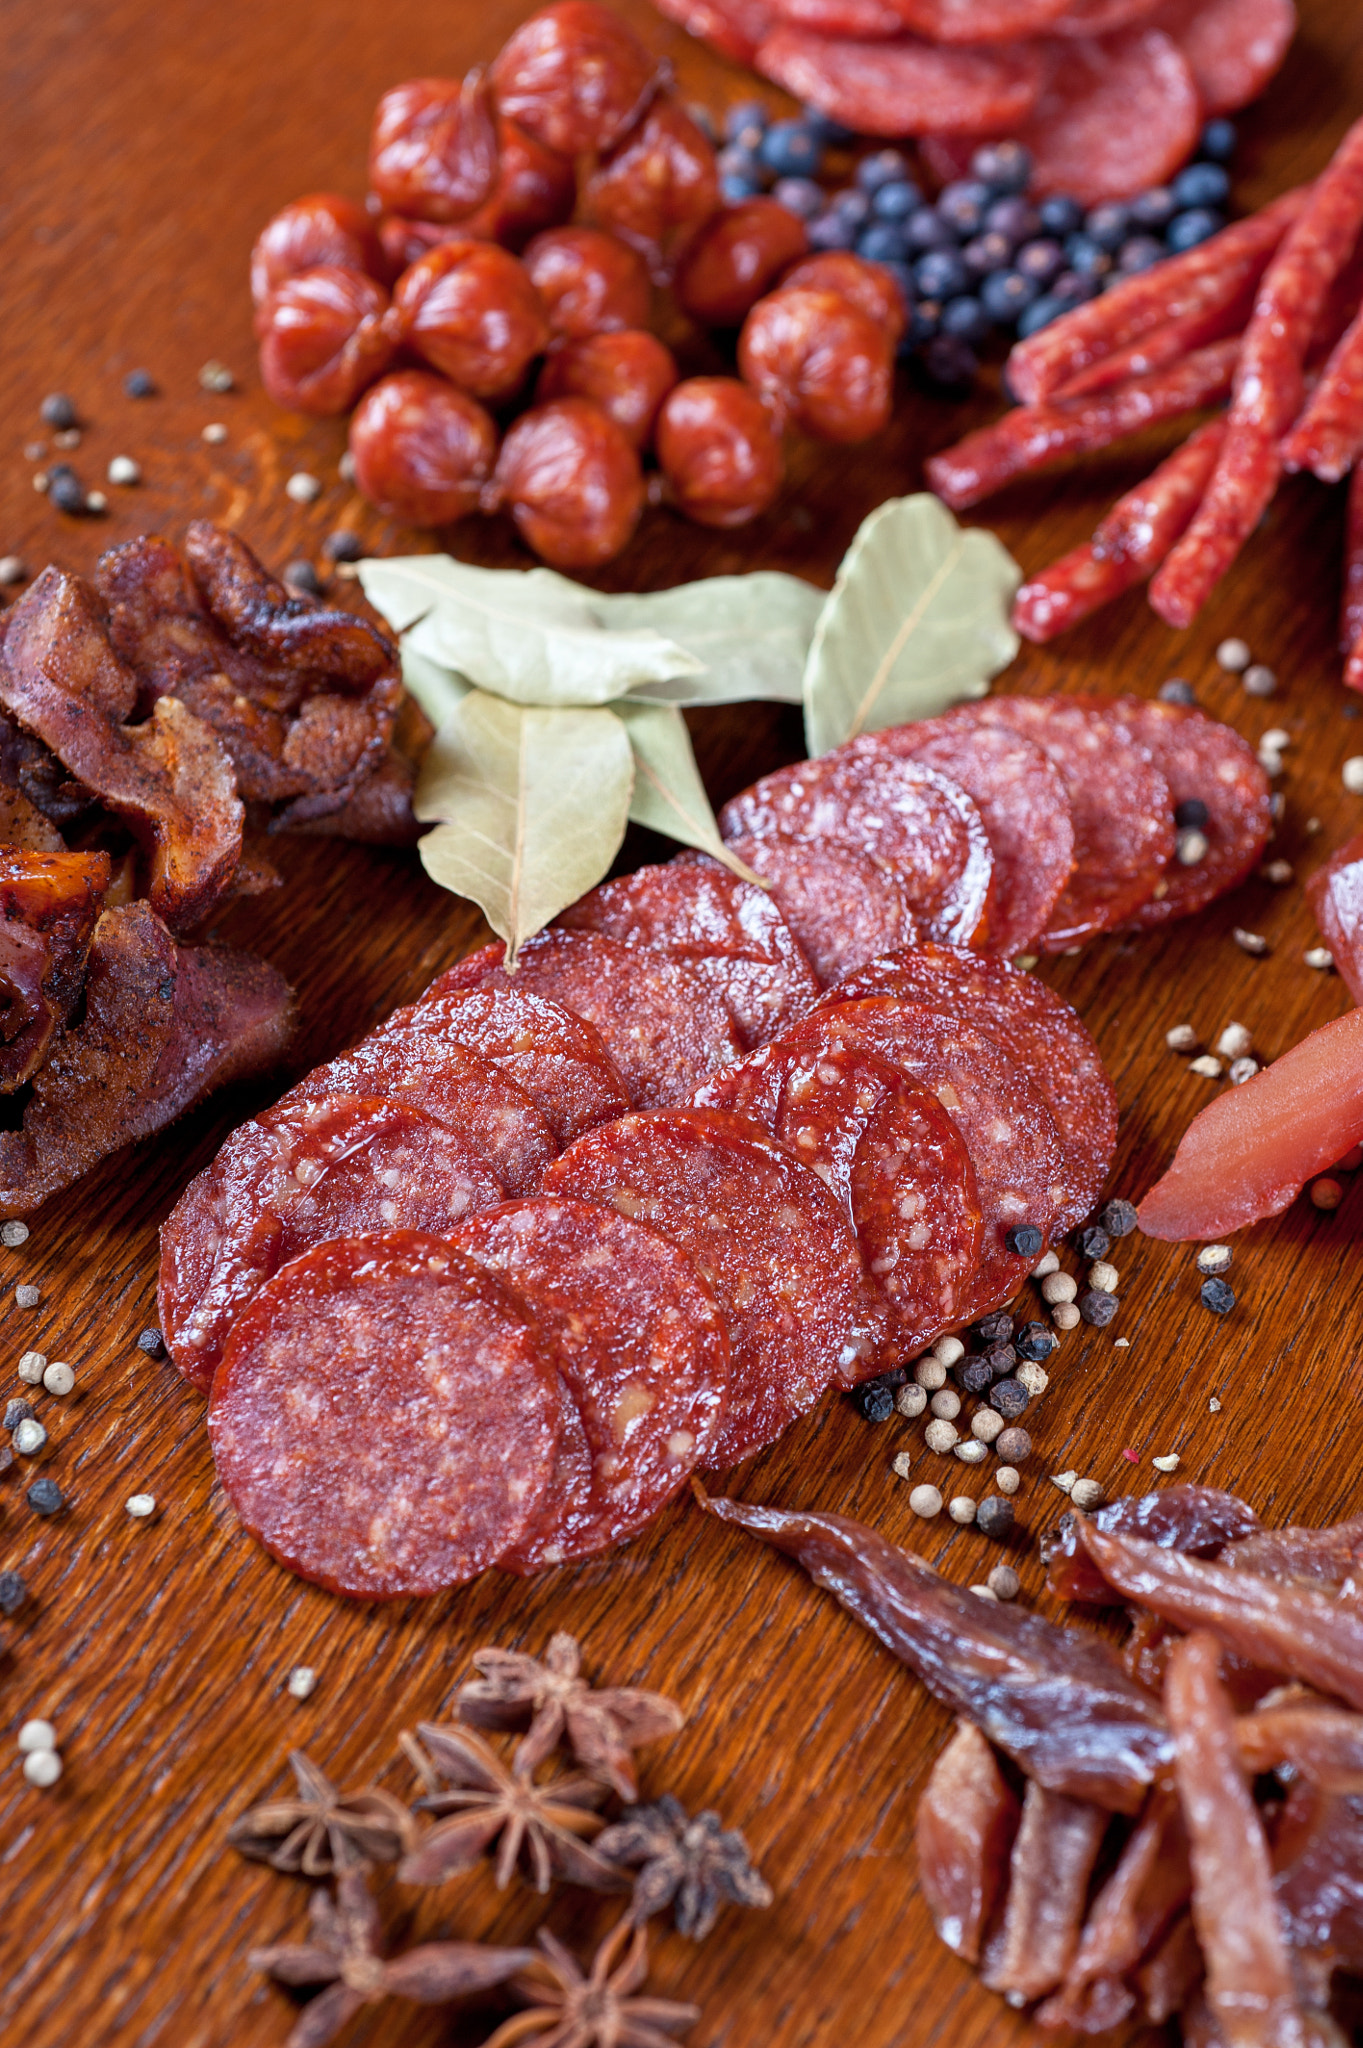 Nikon D700 sample photo. Meat and sausages photography